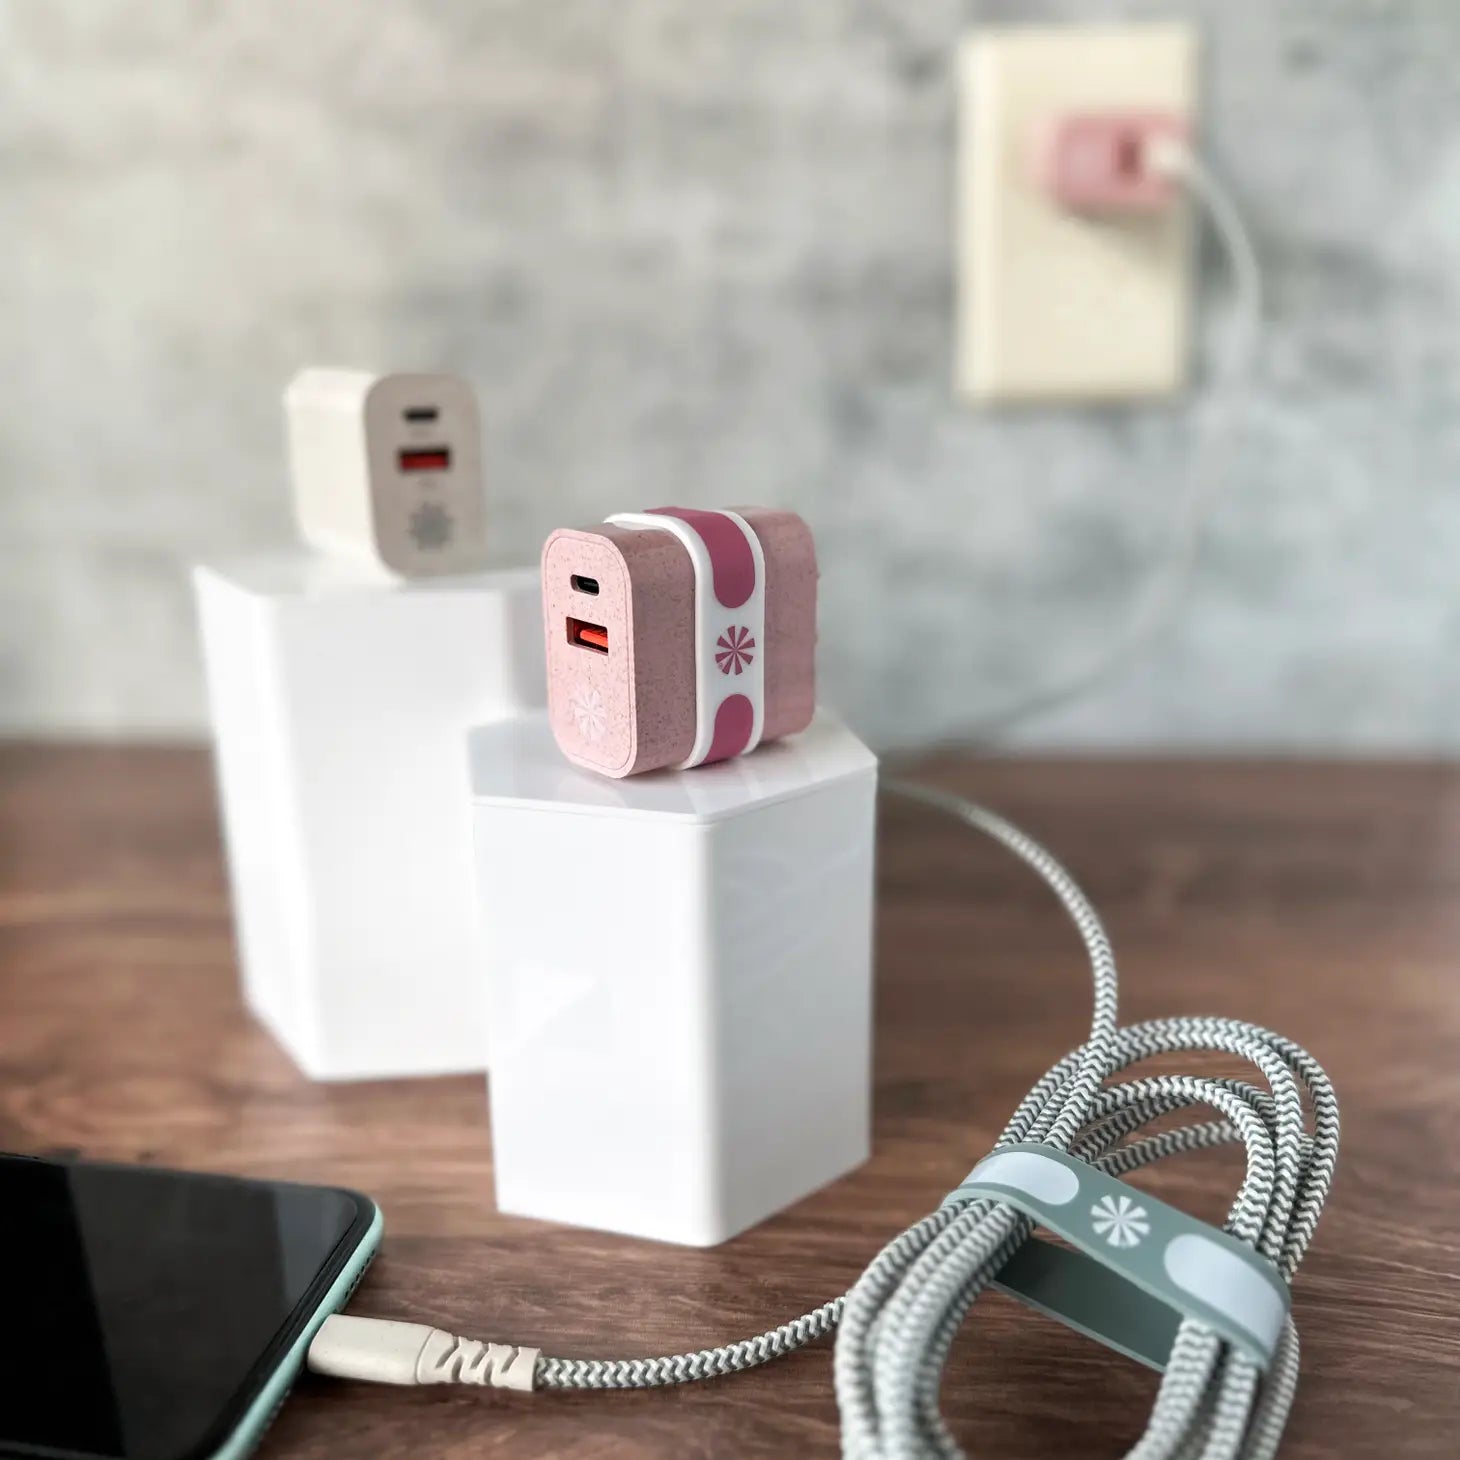 Double Play Eco Wall Power Adapter - Pink